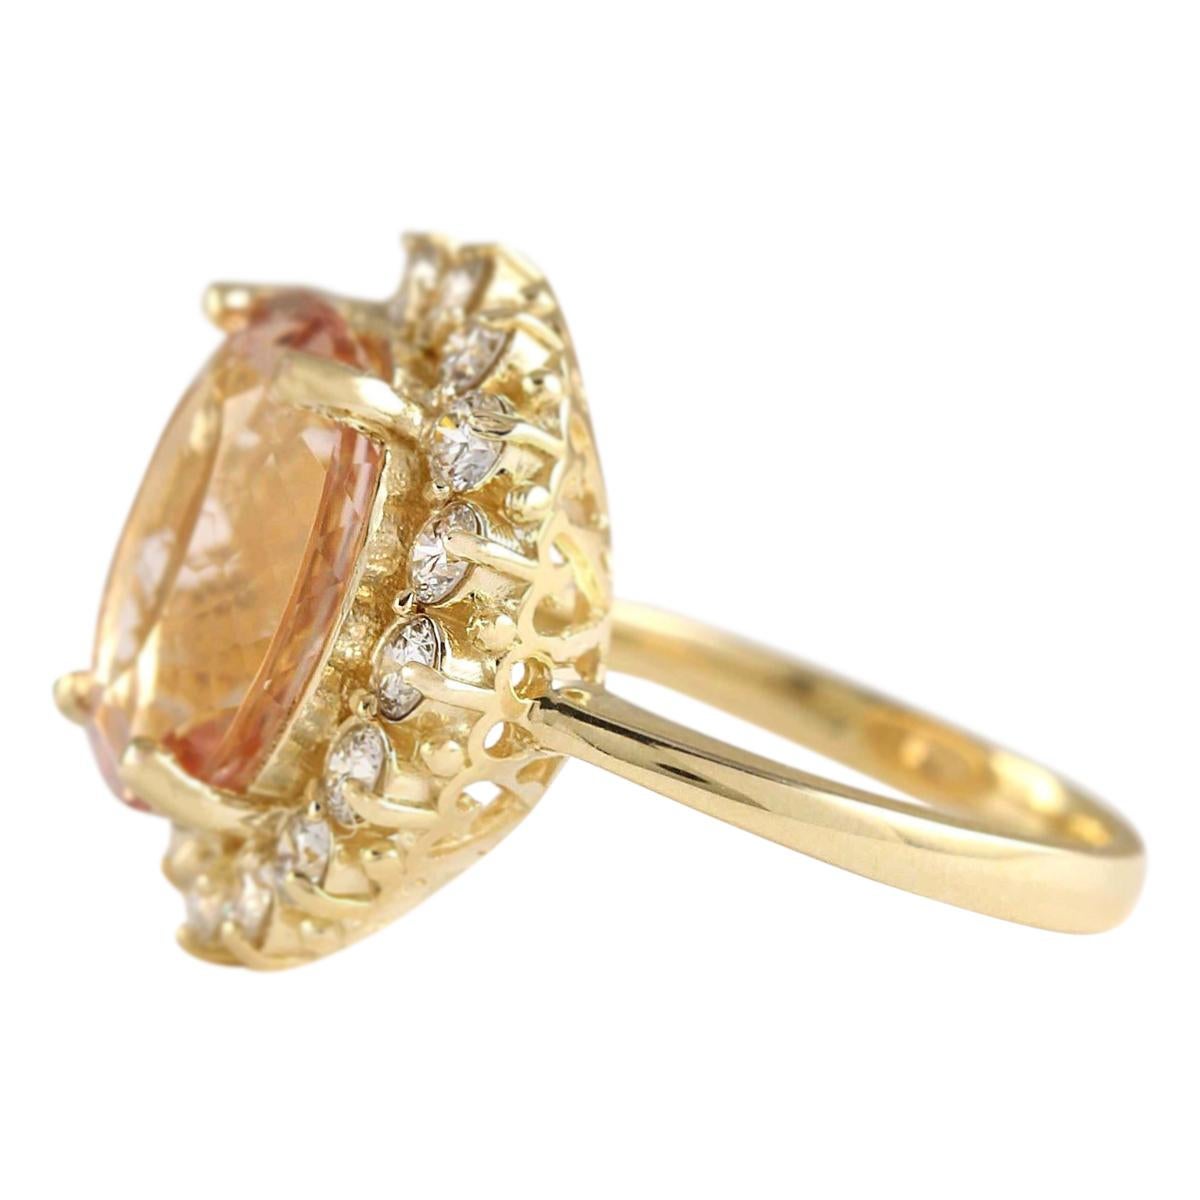 Stamped: 14K Yellow Gold
Total Ring Weight: 7.6 Grams
Total Natural Morganite Weight is 7.65 Carat (Measures: 14.00x10.00 mm)
Color: Peach
Total Natural Diamond Weight is 1.20 Carat
Color: F-G, Clarity: VS2-SI1
Face Measures: 20.30x17.50 mm
Sku: